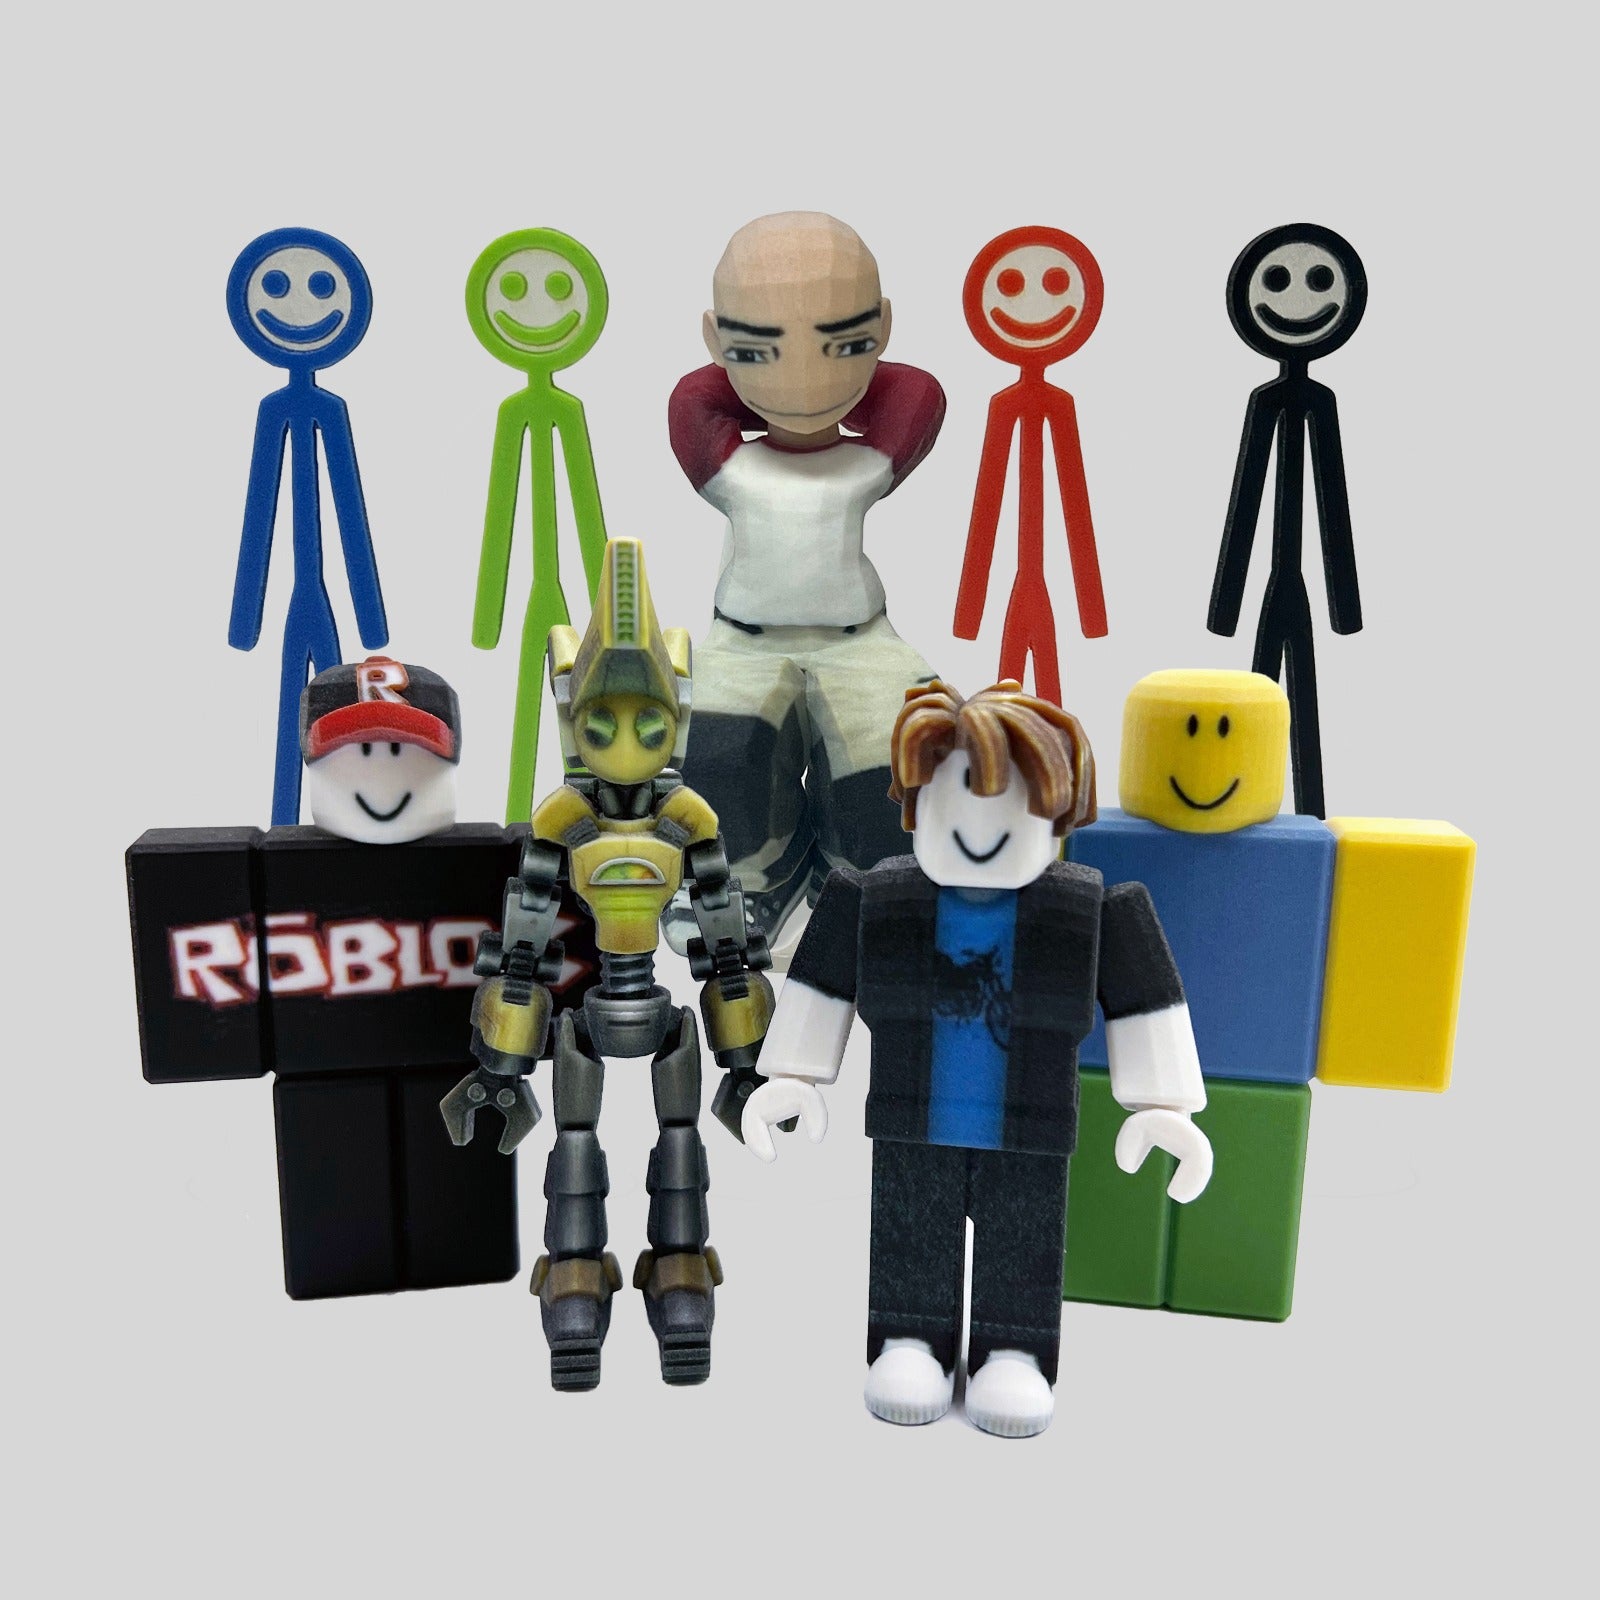 New Roblox figurines in our Collectible Roblox Collection!